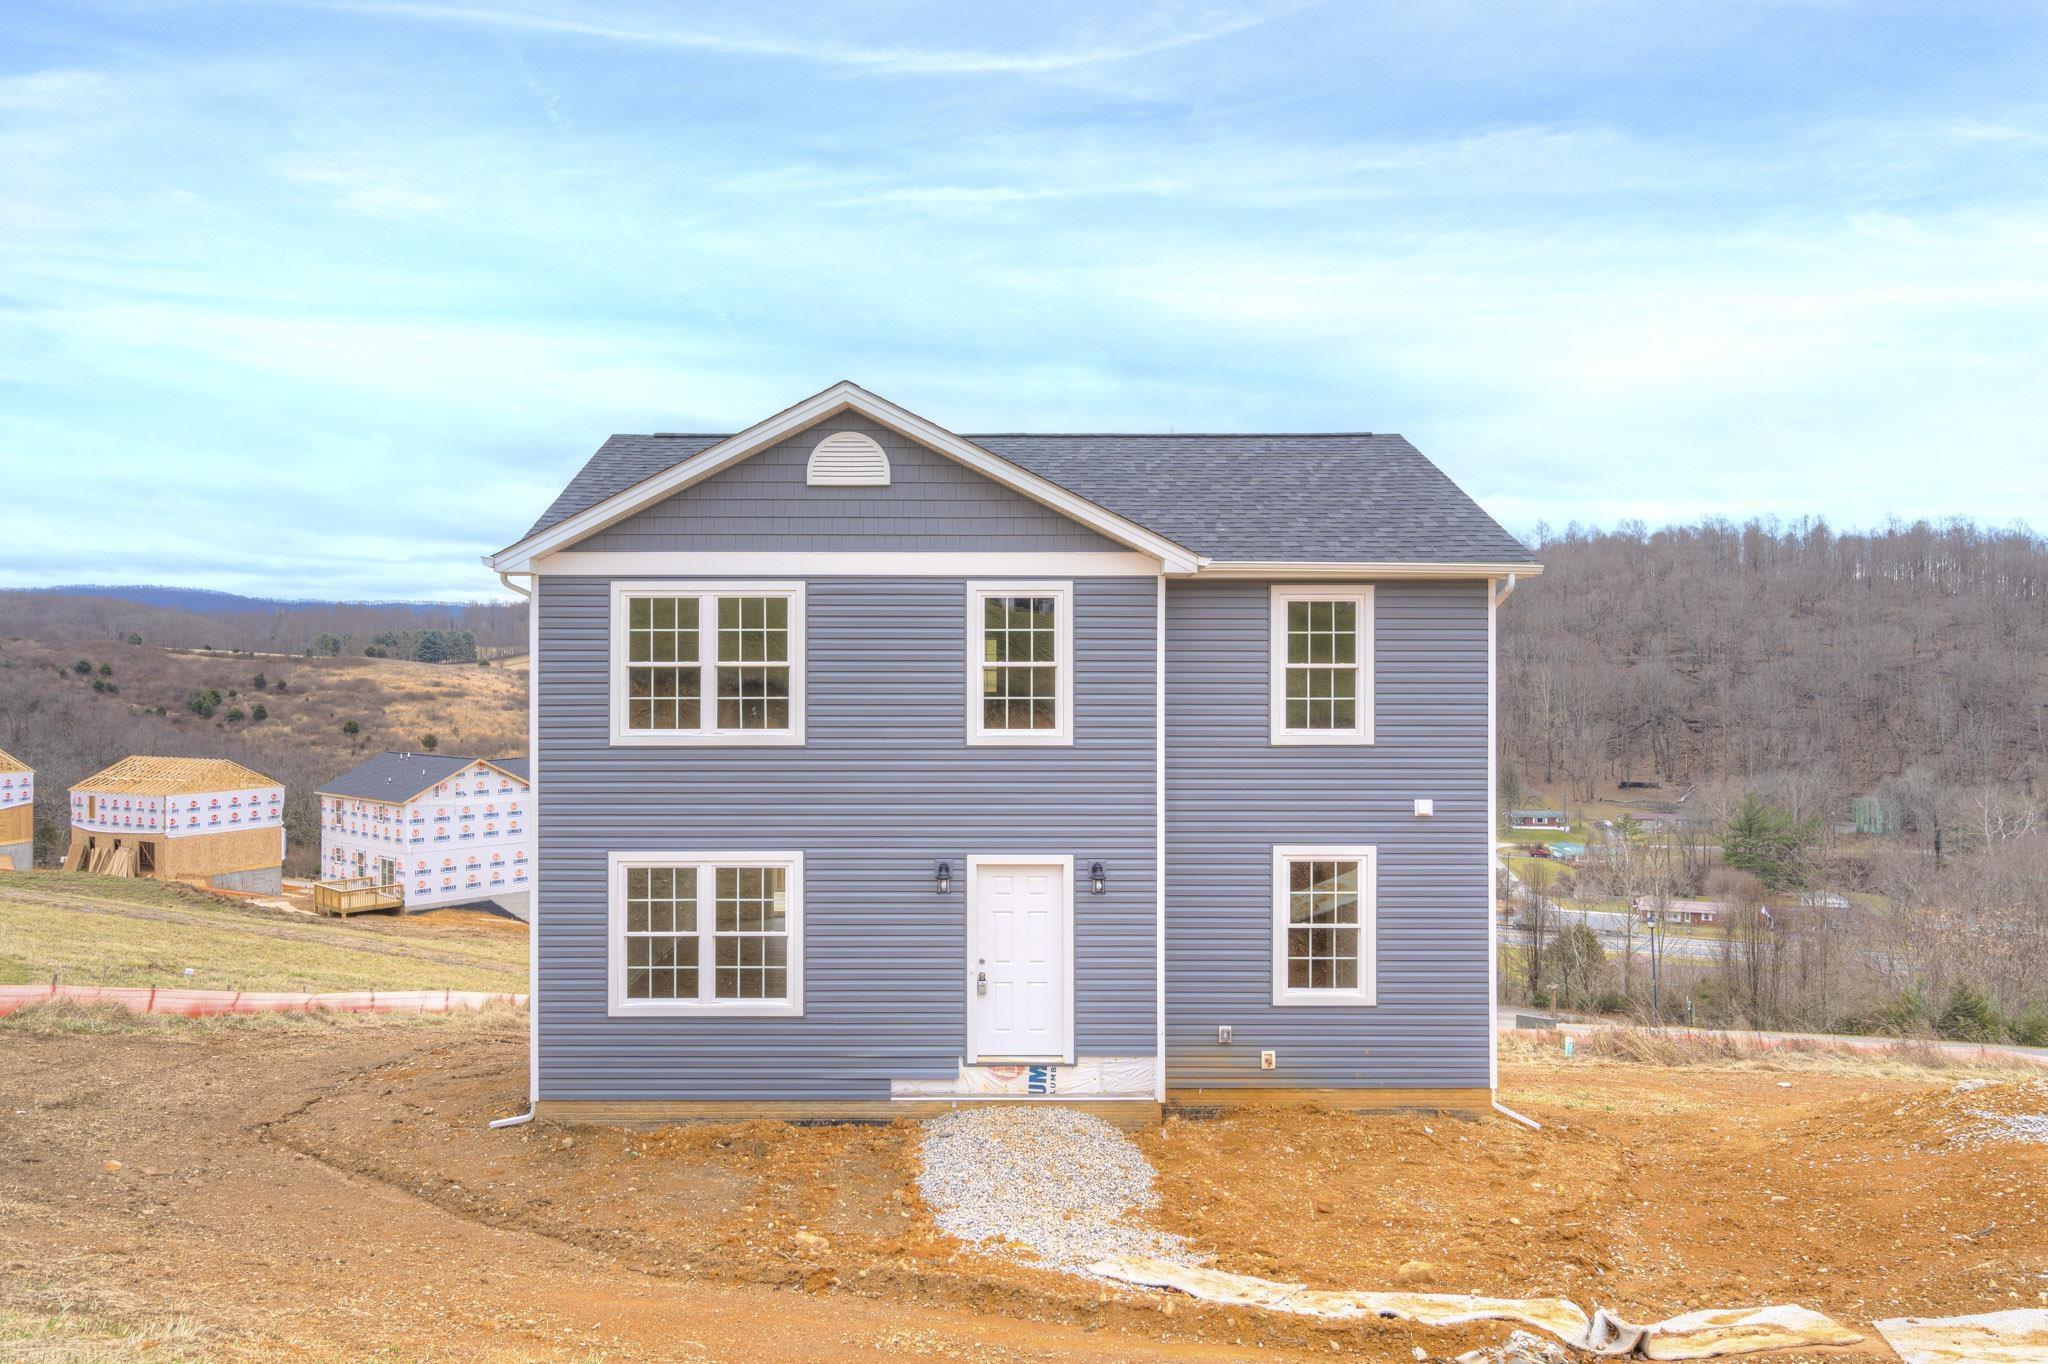 Come check out  this brand new construction home which features 3 spacious bedrooms, 2  1/2 baths, an open floor plan throughout, and a full unfinished basement, with lots of room to grow! Located conveniently to Blacksburg. You will also enjoy 21+ acres of common area, recreational space which include basketball courts, playgrounds, large pavilions, walking trails, ponds and more! You won't want to miss the opportunity to make this Brand New House your home. Why buy an older home when you can own a brand new home that comes with new construction builder warranty's. Give us a call today to schedule your showing!